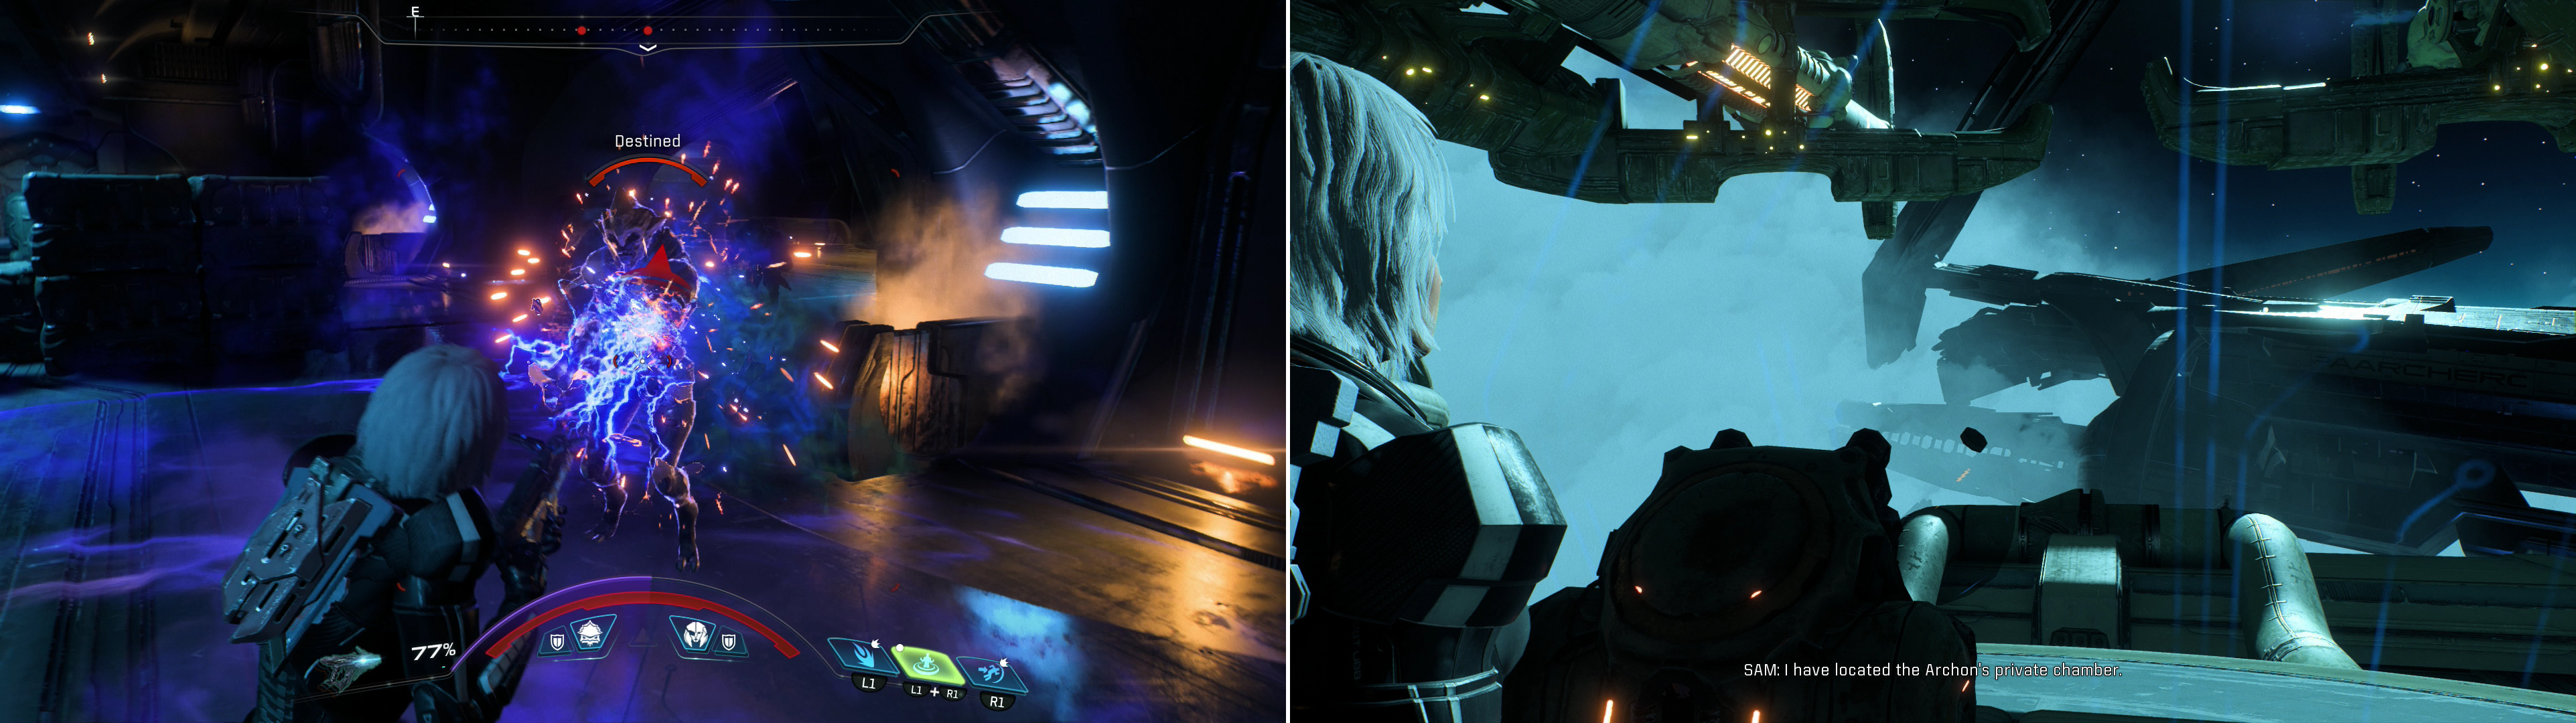 Fight the Kett that greet you when you enter the Kett ship (left) then access a terminal to learn the location of the Archon’s chamber (right).